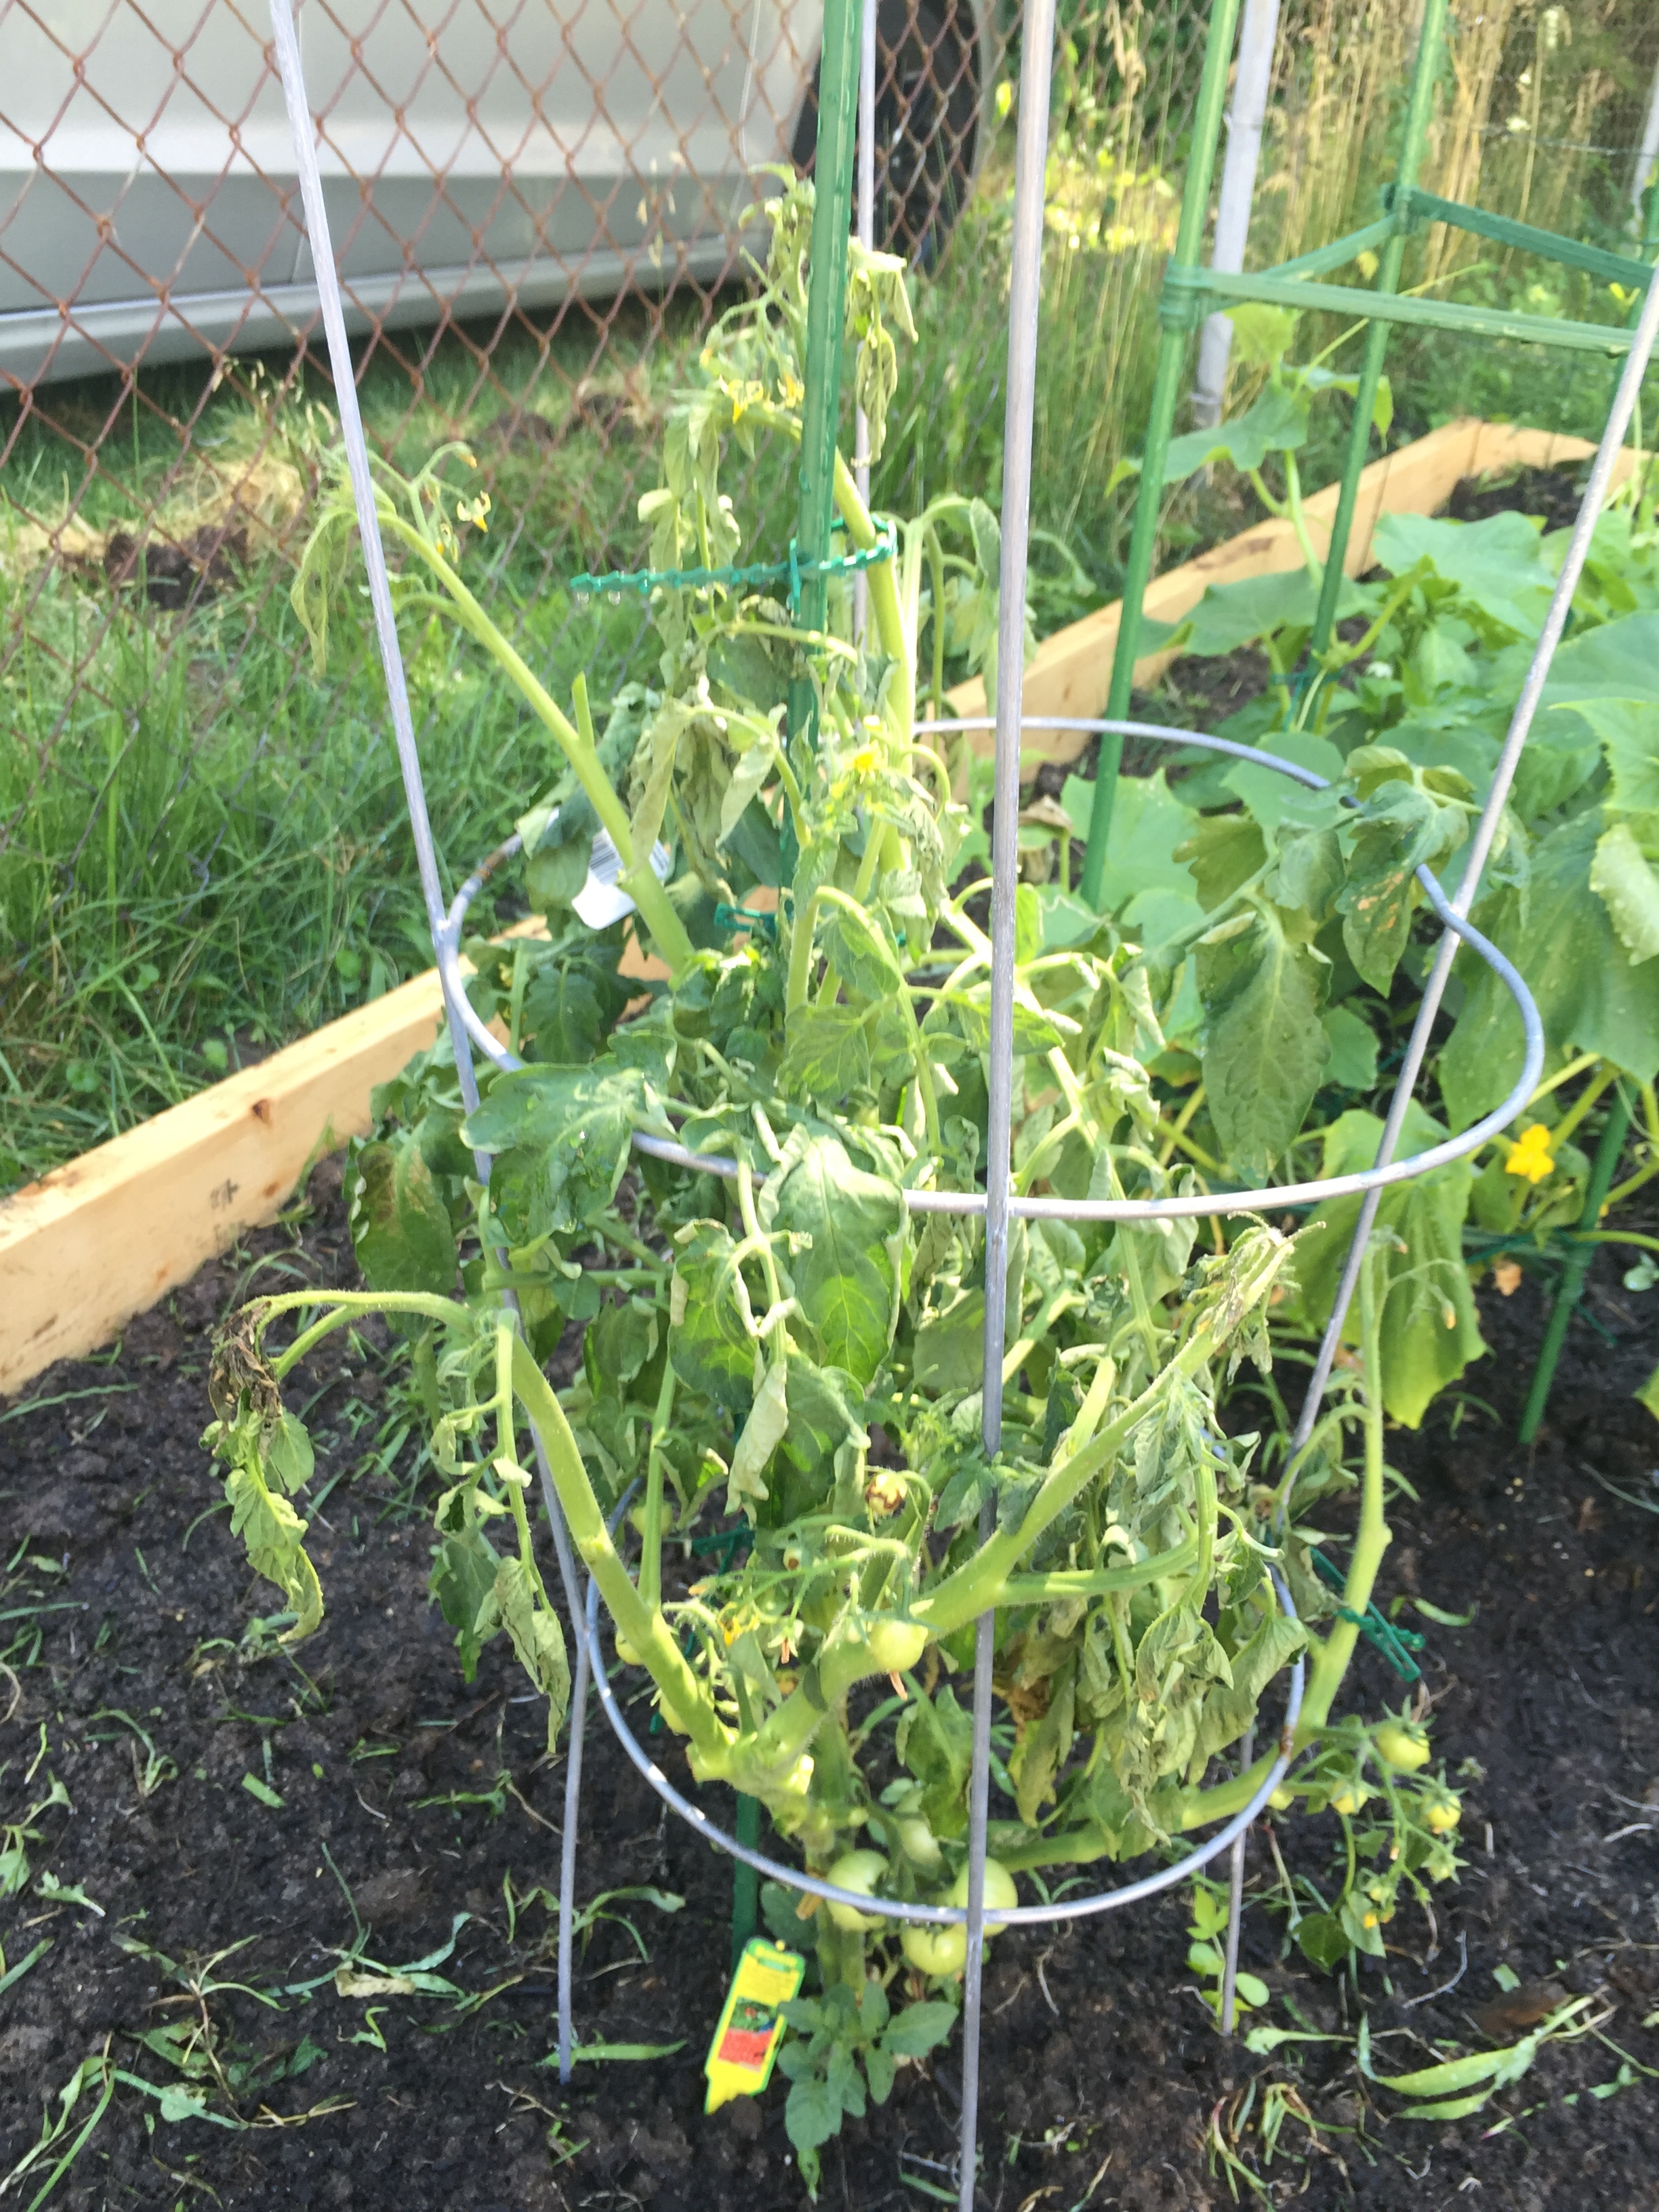 Cherry tomato plant wilting? - Ask an Expert